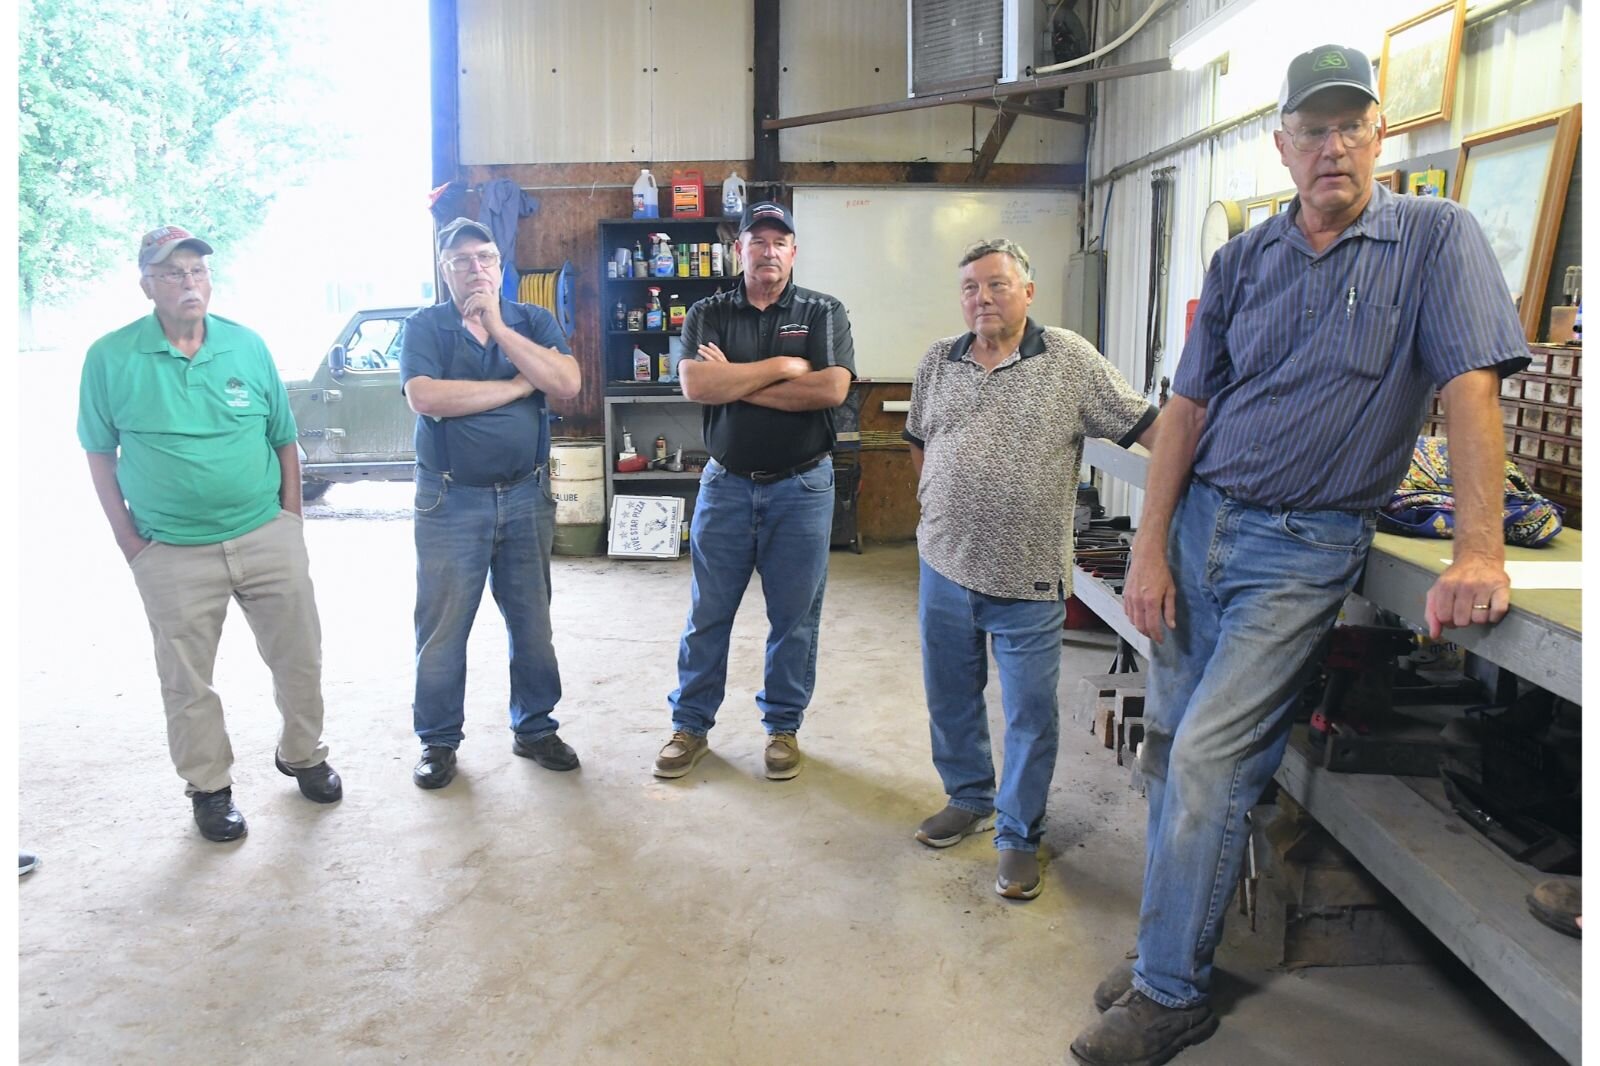 Fred Heaton, right, and other rural residents of Clarendon Township in Calhoun County are concerned about the poor quality of the roads where they live and work.